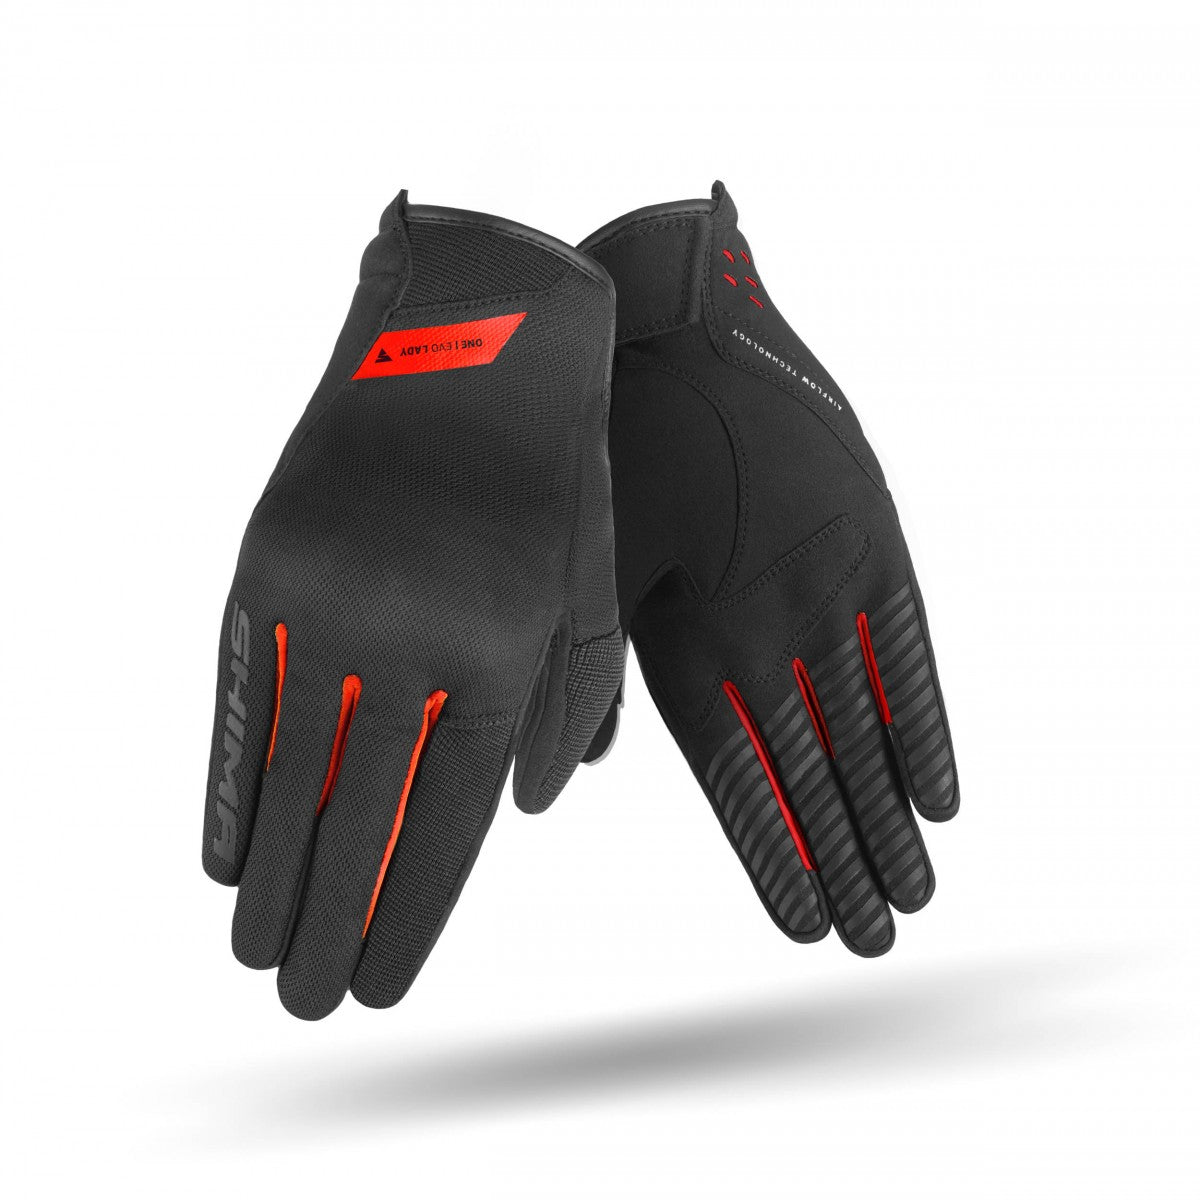 SHIMA ONE EVO LADY MOTORCYCLE LADY GLOVE IN BLACK AND RED DETAILS 